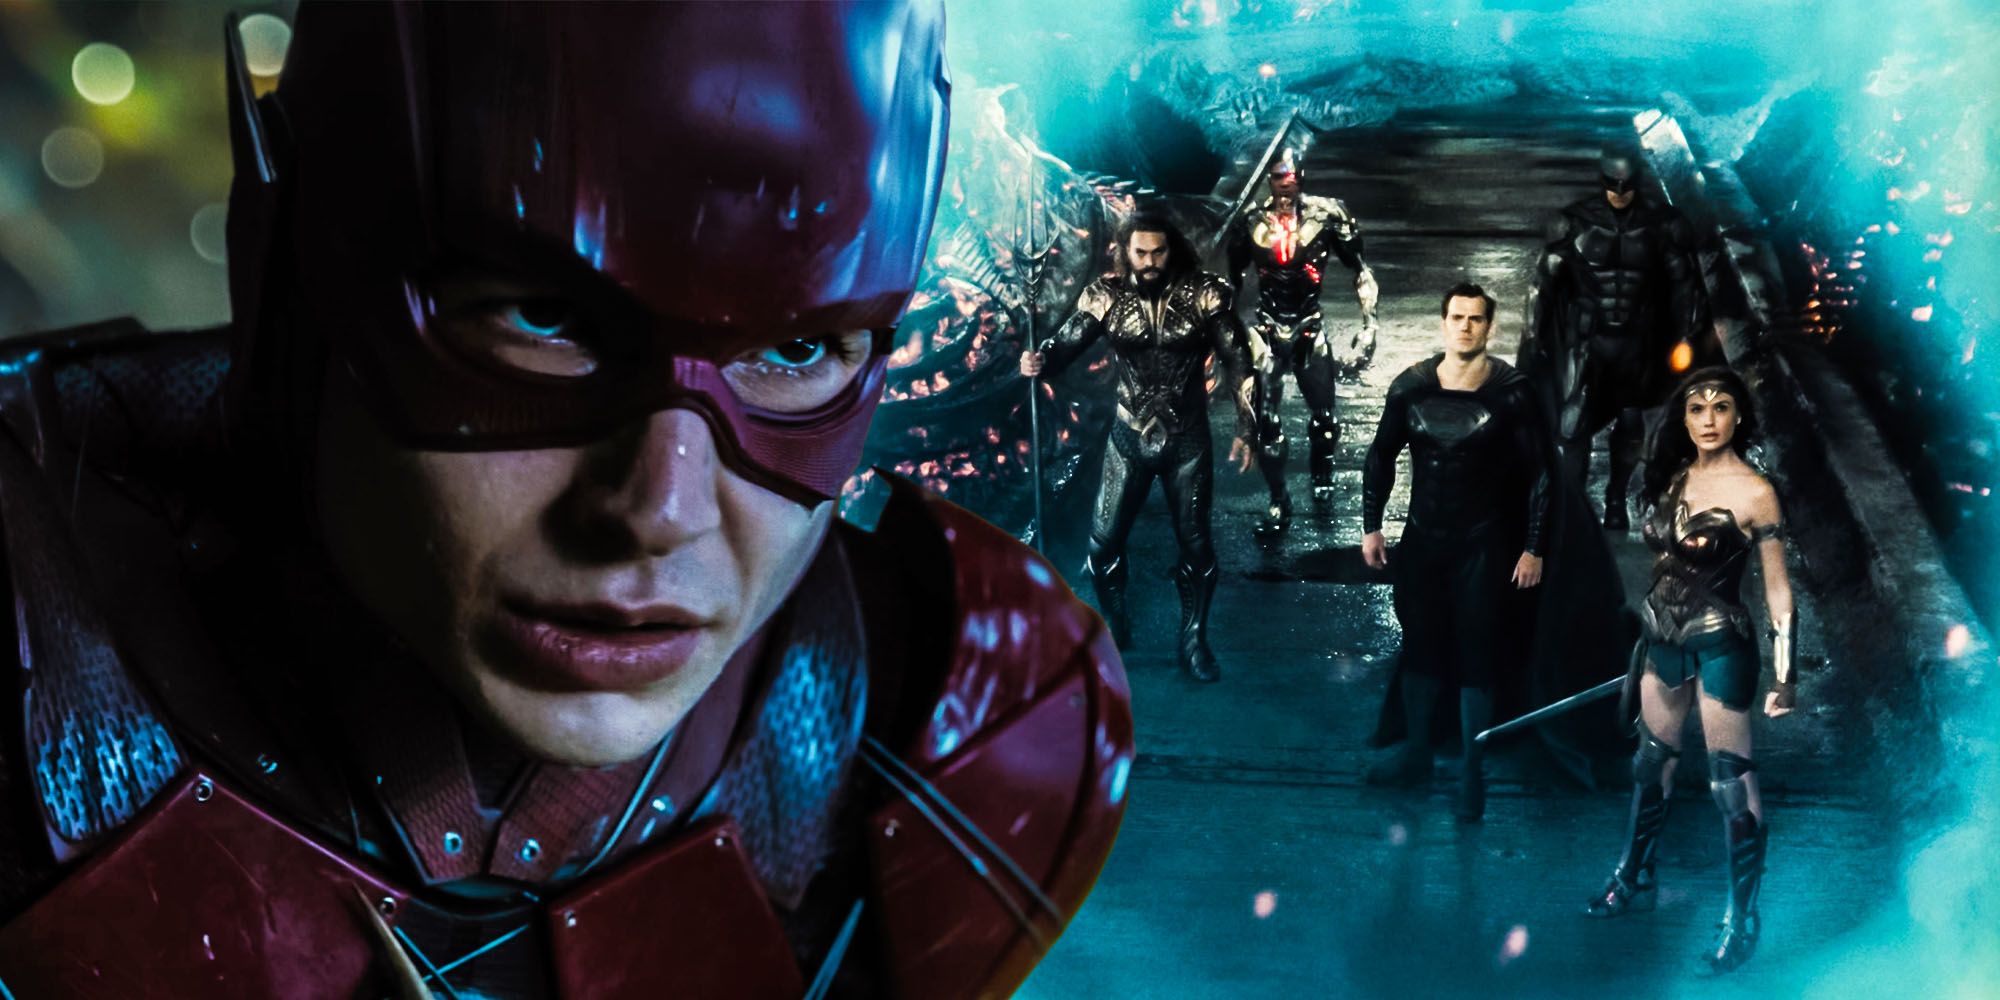 Justice League Snyder cut 2021 record proves WB snyderverse mistake